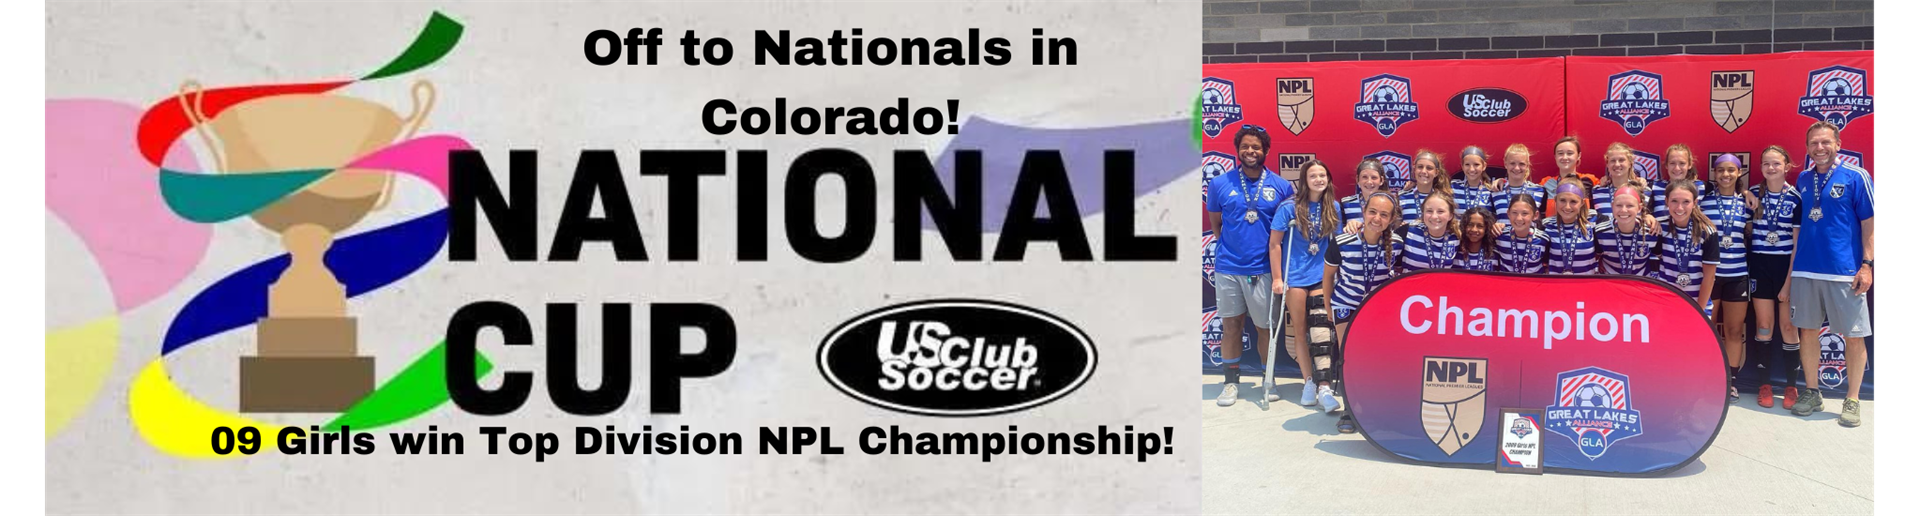 09 Girls Heading to National Finals in Colorado